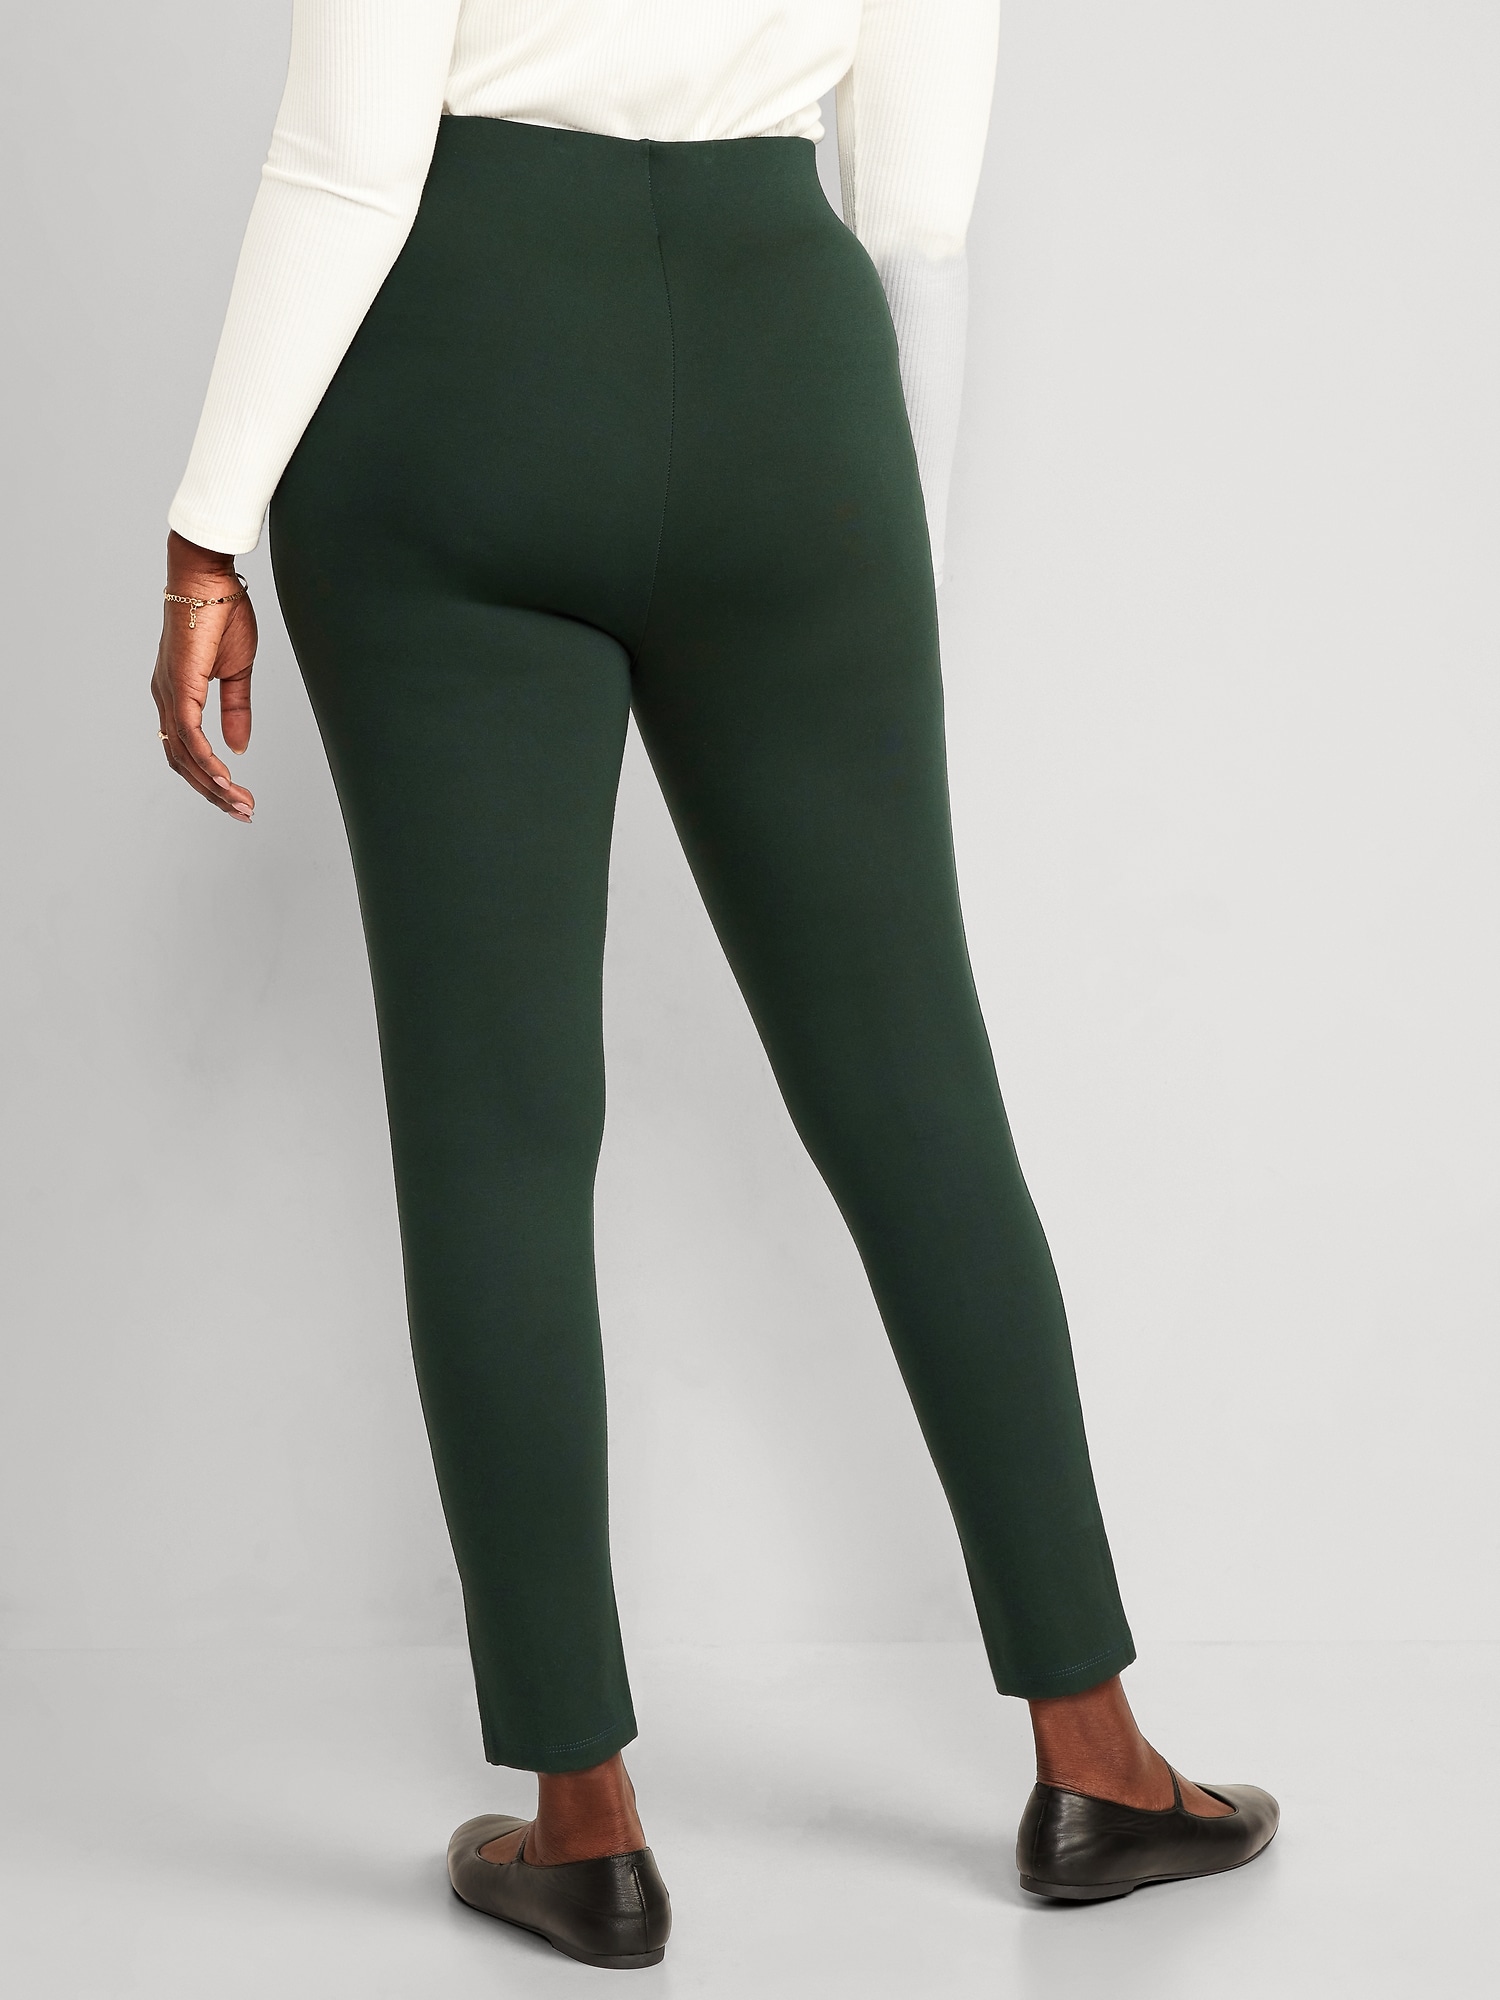 Old Navy Stevie High Rise Skinny Pants Green Size S petite - $25